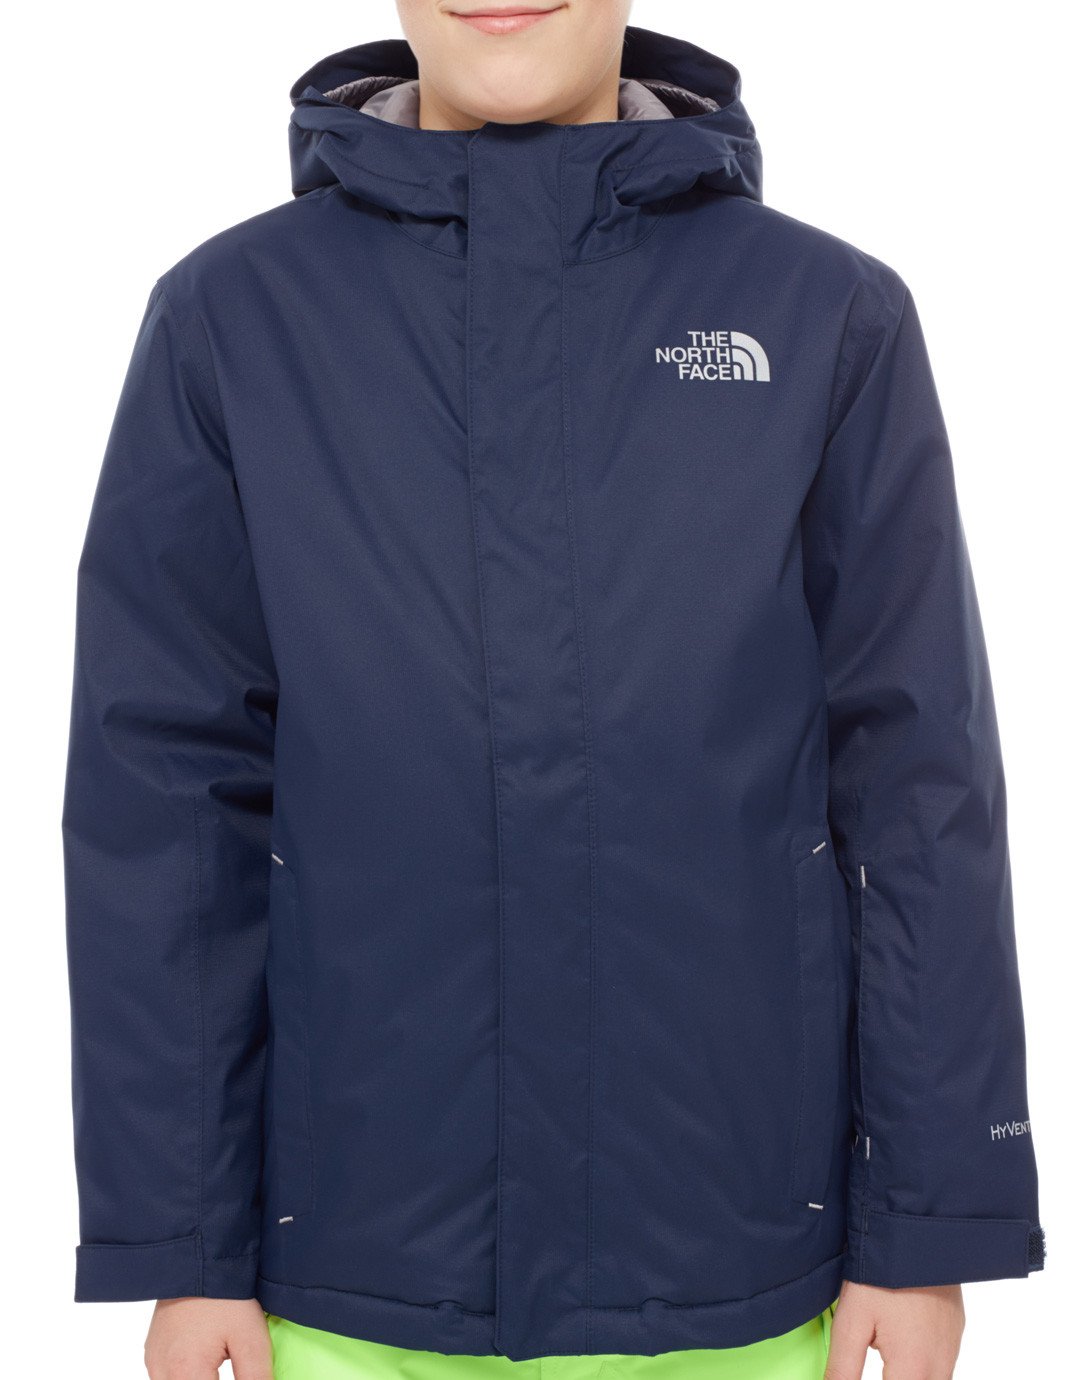 The North Face Kids Snowquest Jacket - Cosmic Blue | Simply Hike UK